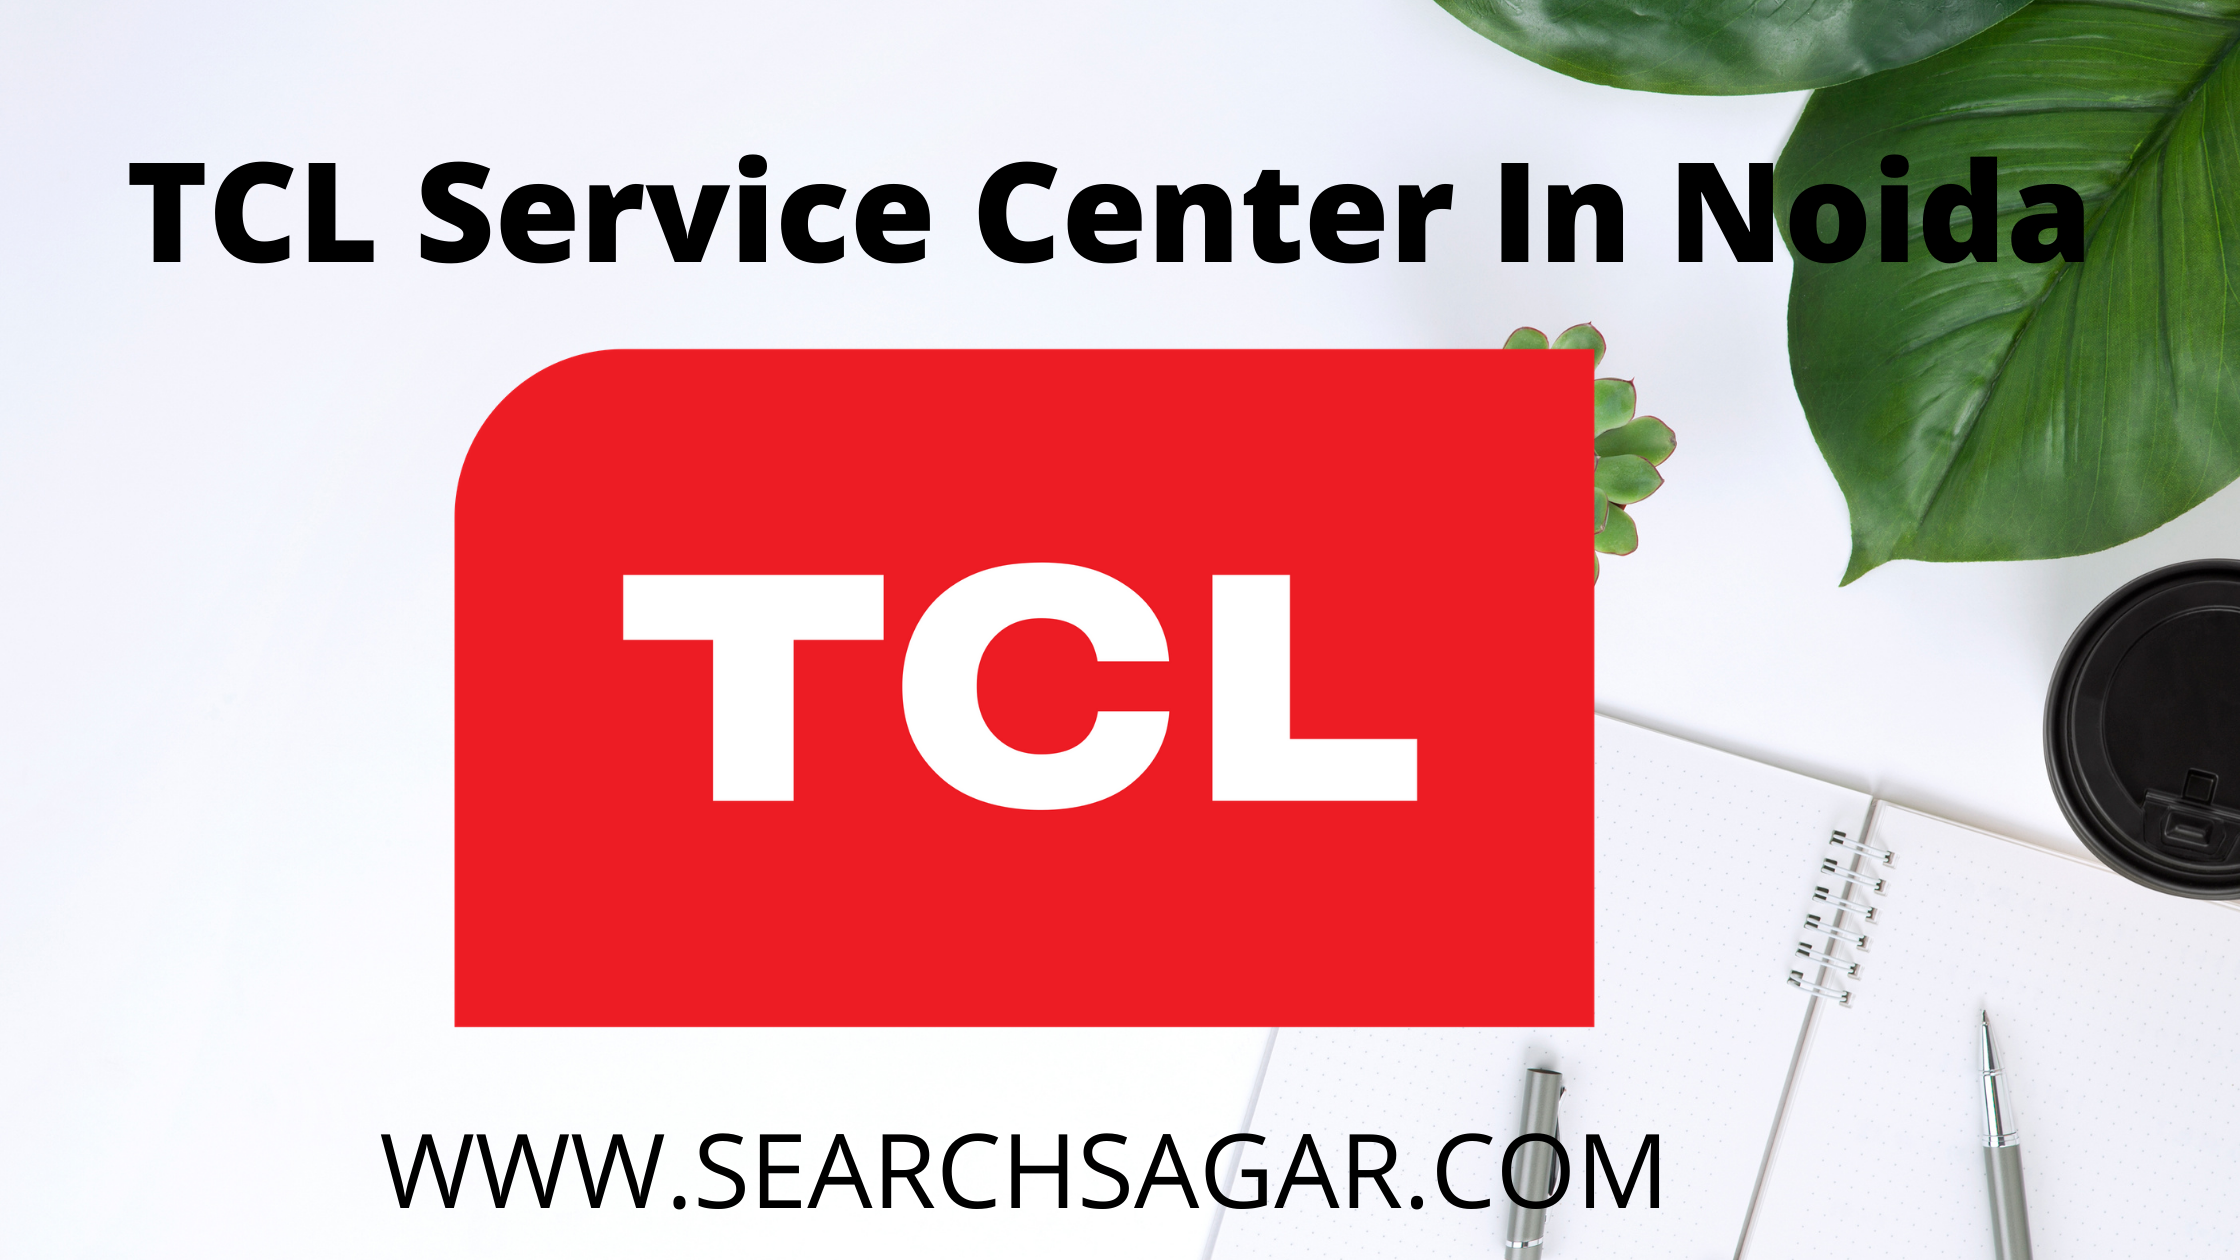 TCL Service Center In Noida